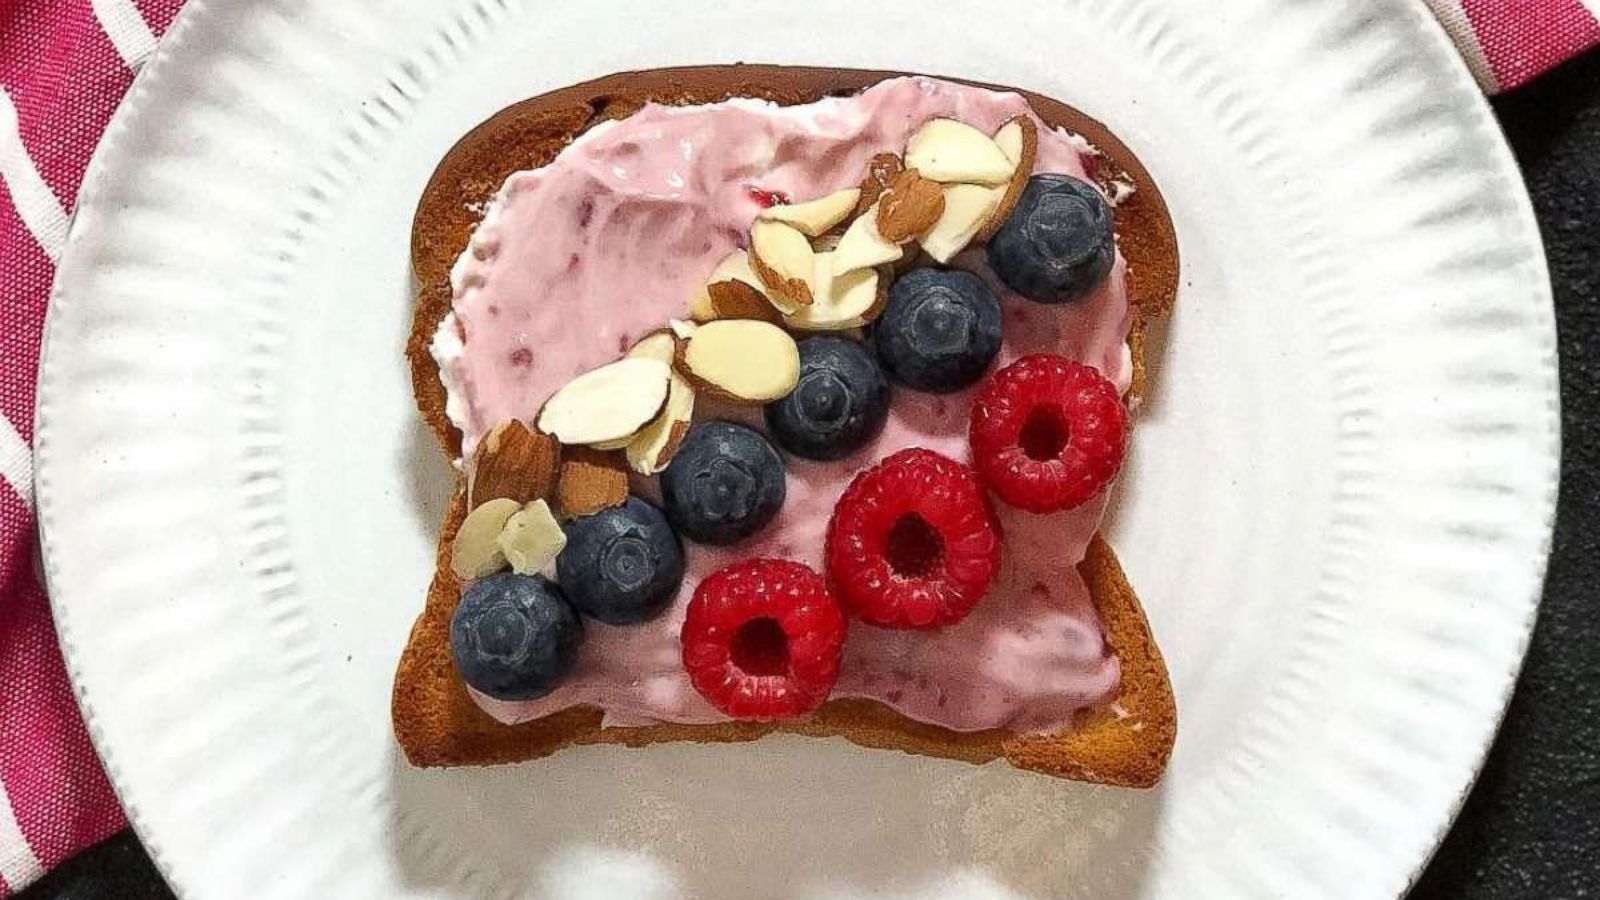 PHOTO:Anna Brown who posts her healthy eats on @nutritionsqueezed came up with "millennial pink toast" made of Greek yogurt mixed with strawberry jam and topped with almond silvers, blueberries and raspberries.